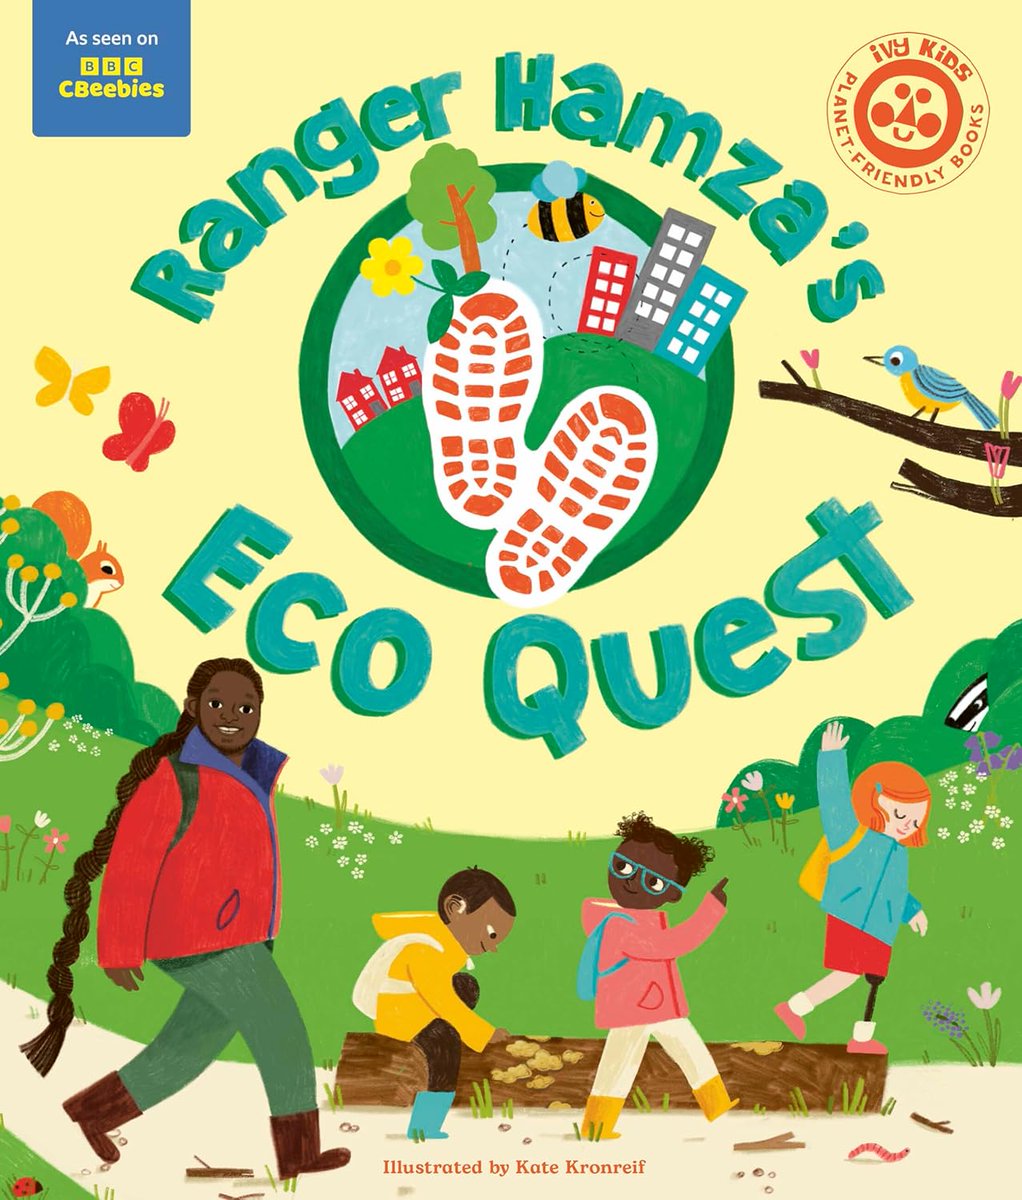 🎉🙌🏿Happy #BookBirthday🙌🏿🎉 📖RANGER HAMZA’S ECO QUEST by Ranger Hamza @HamzaYassin3, Kate Kronreif @kate_kronreif, Ivy Kids Eco @QuartoKids Congrats!!! #OurStoriesMatter